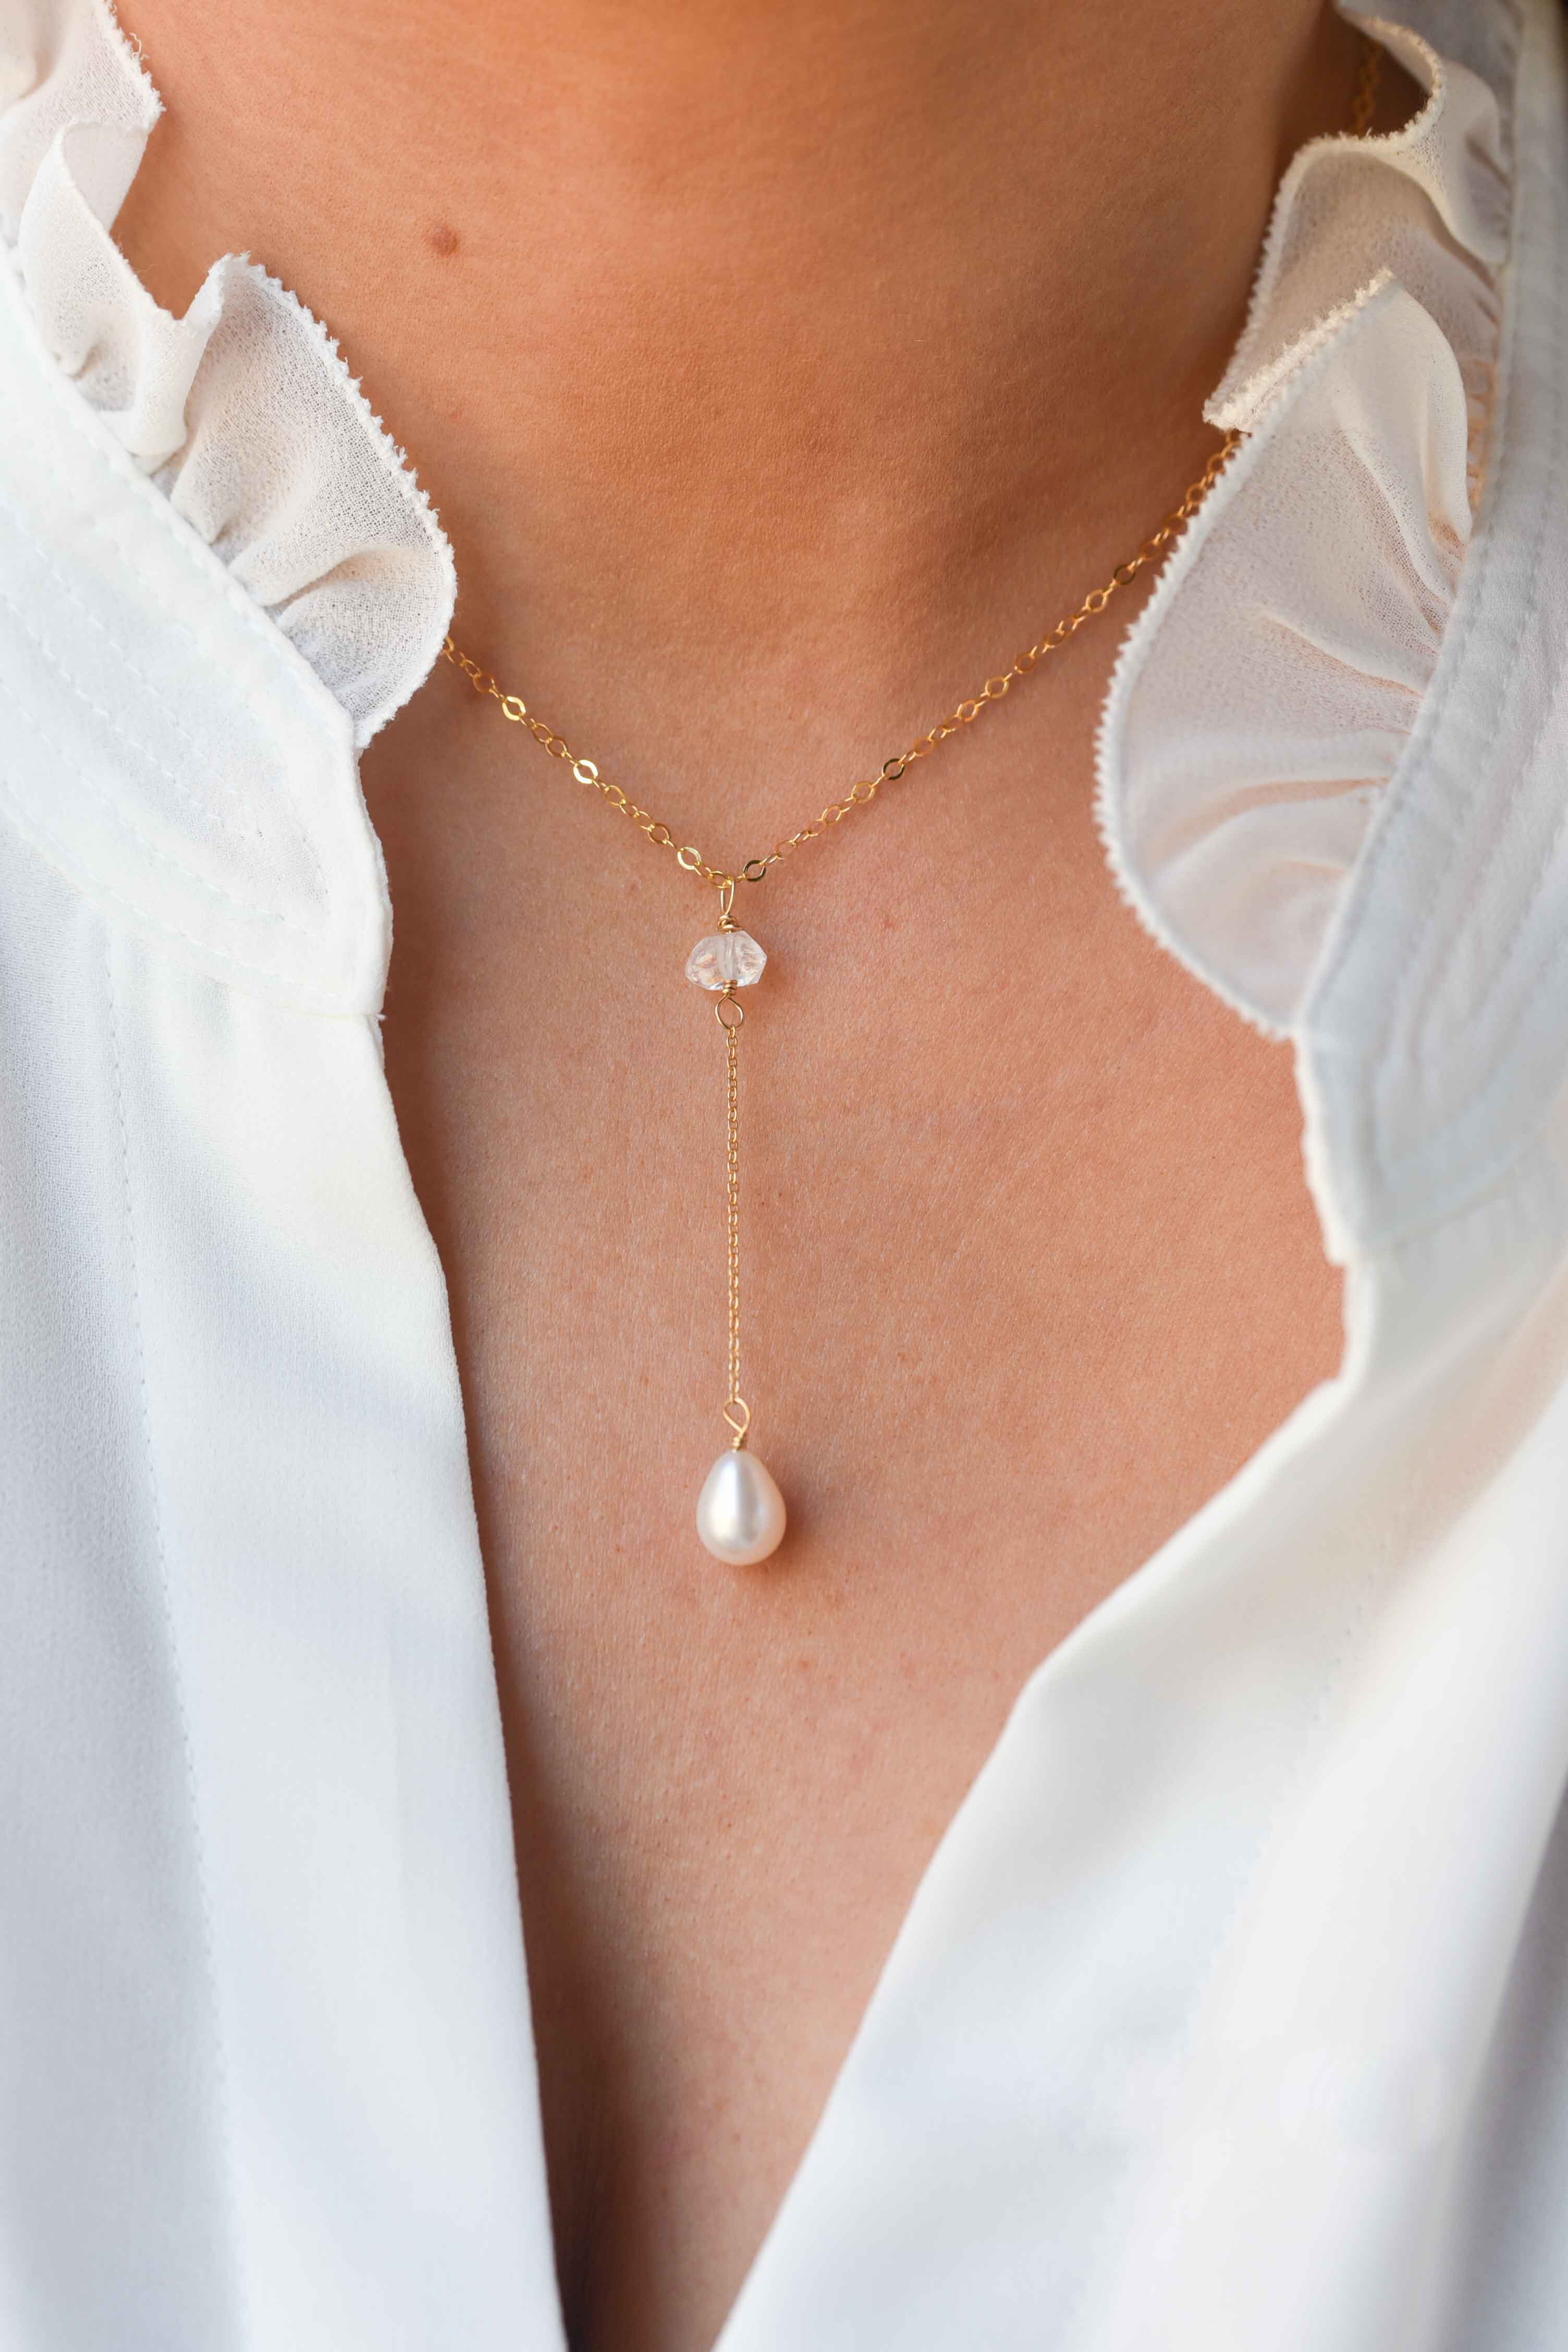 Herkimer  Pearl Delicate Lariat Necklace Gold Filled Rose Gold Filled. Dainty Minimalist Lariat Y necklace gift for girls birthstone wedding bridal bridesmaid gifts